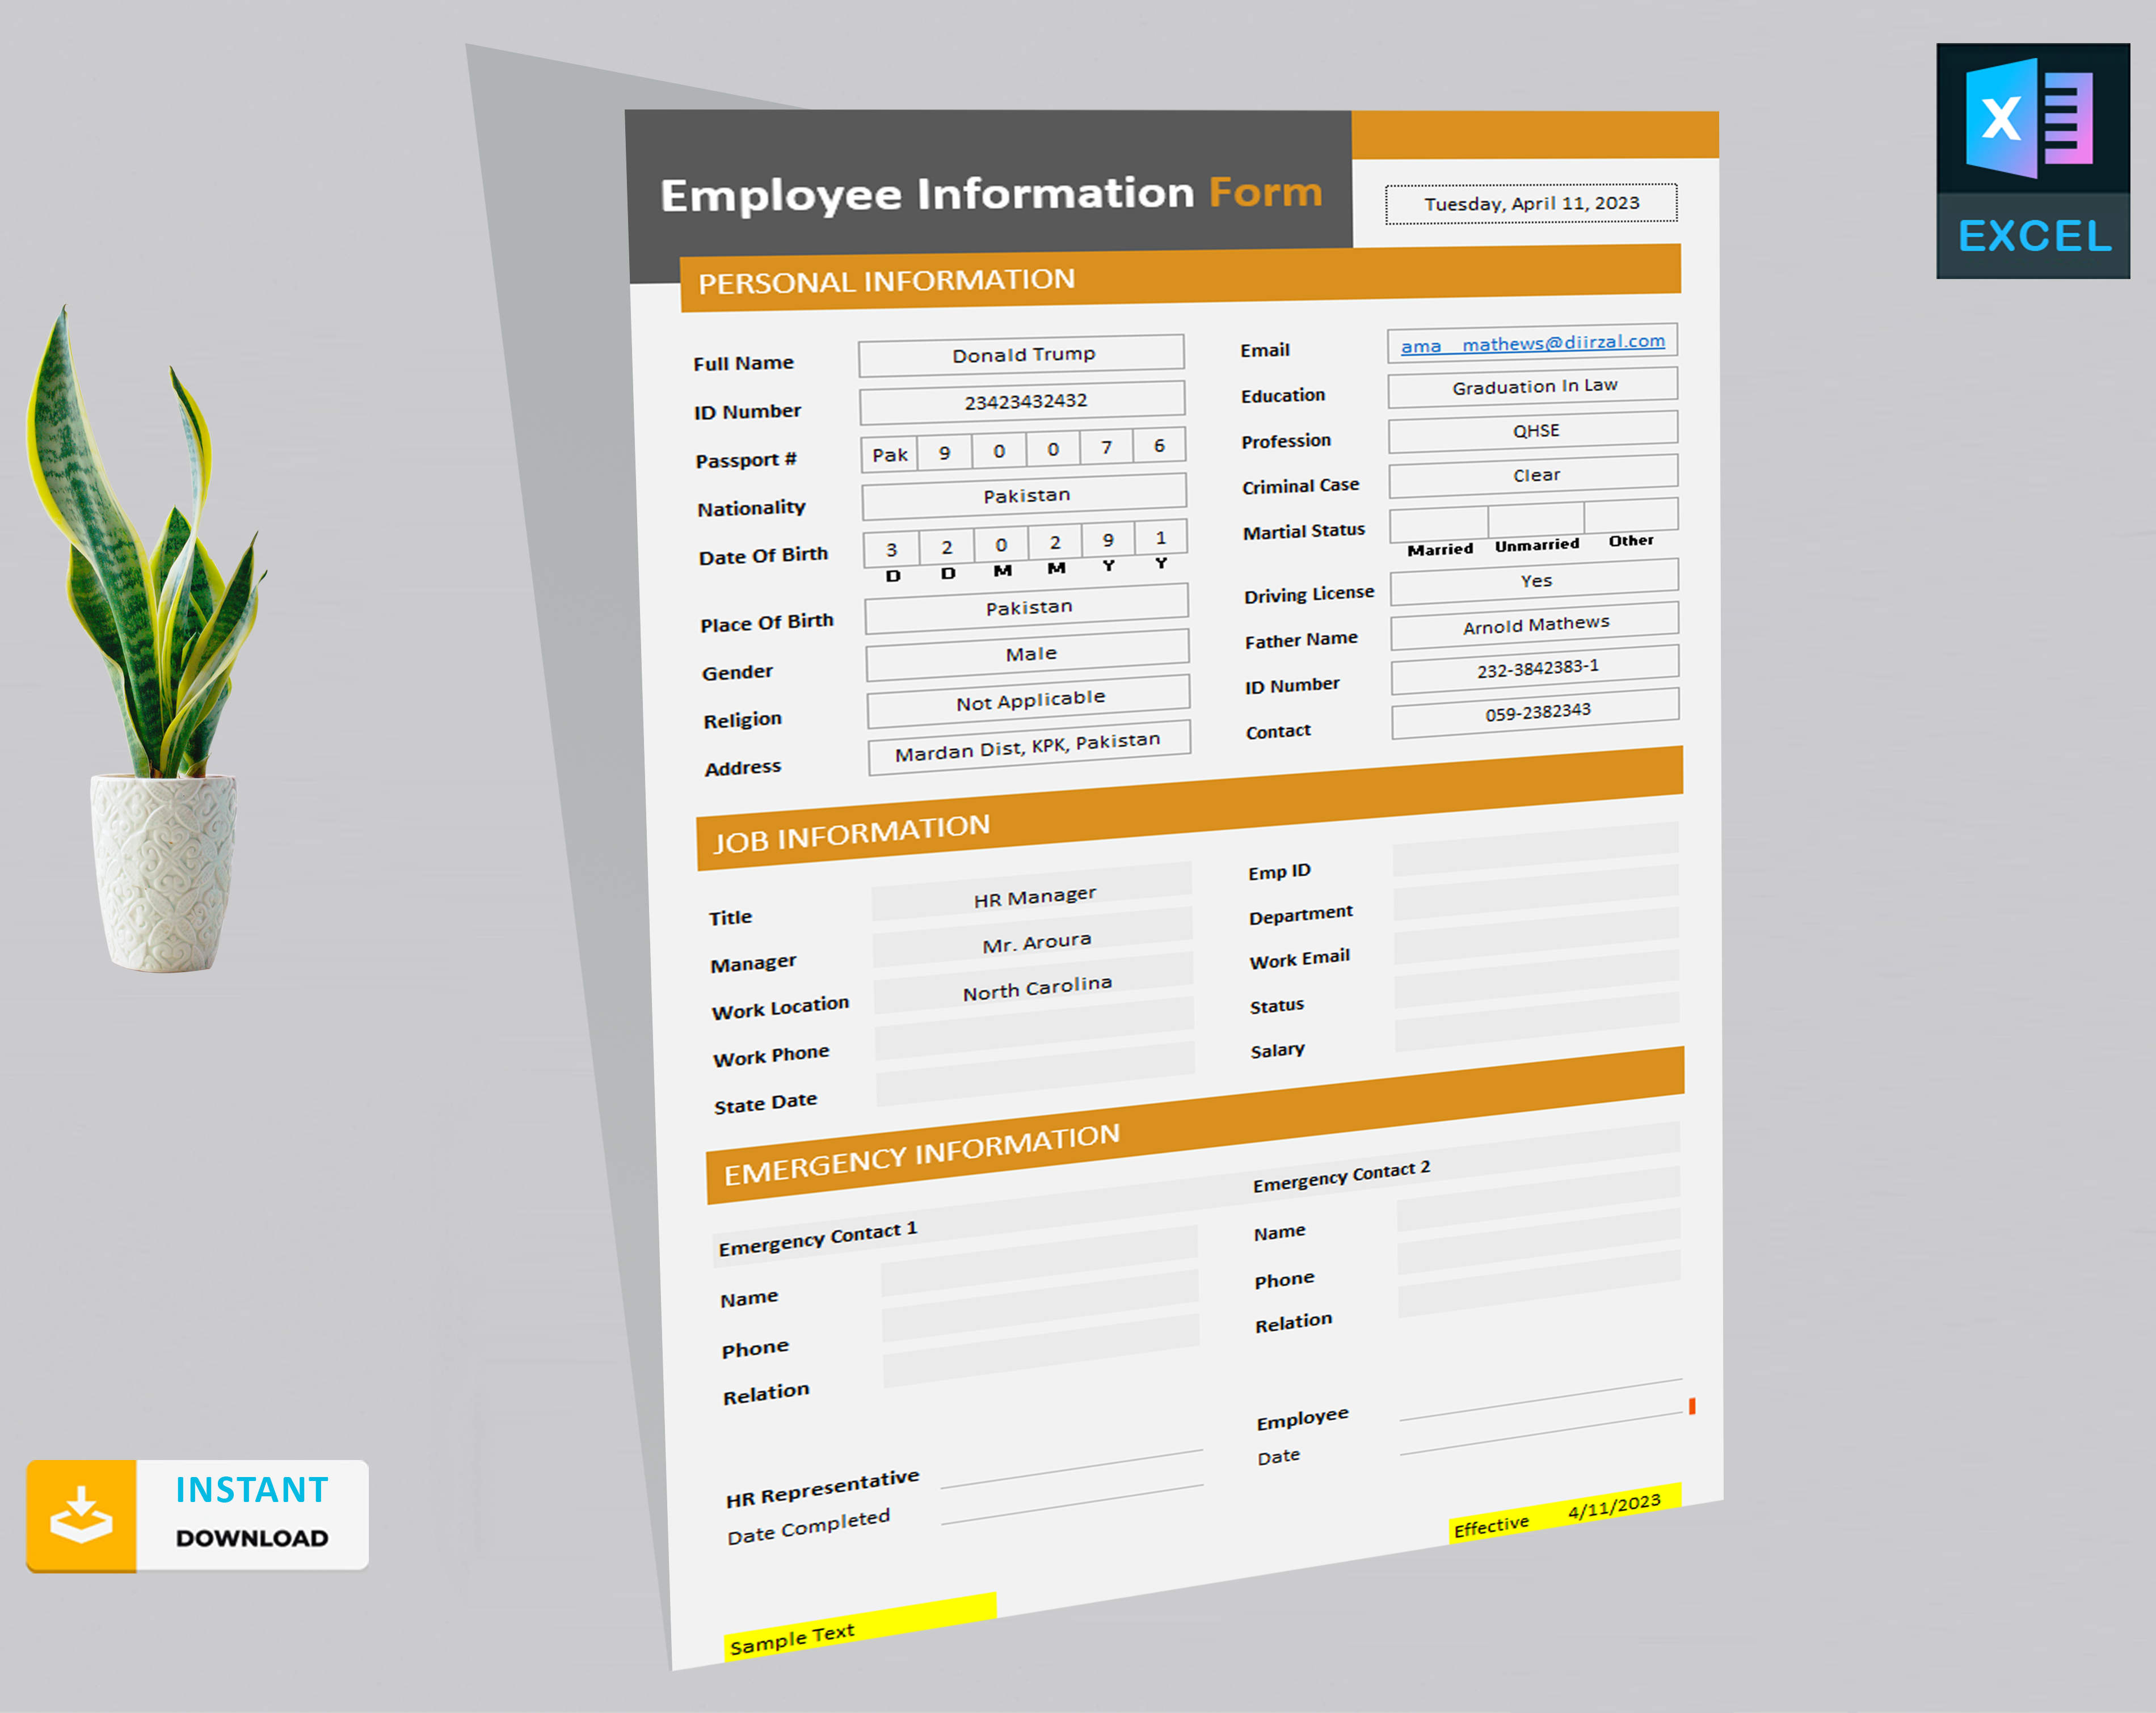 Employees Information form template